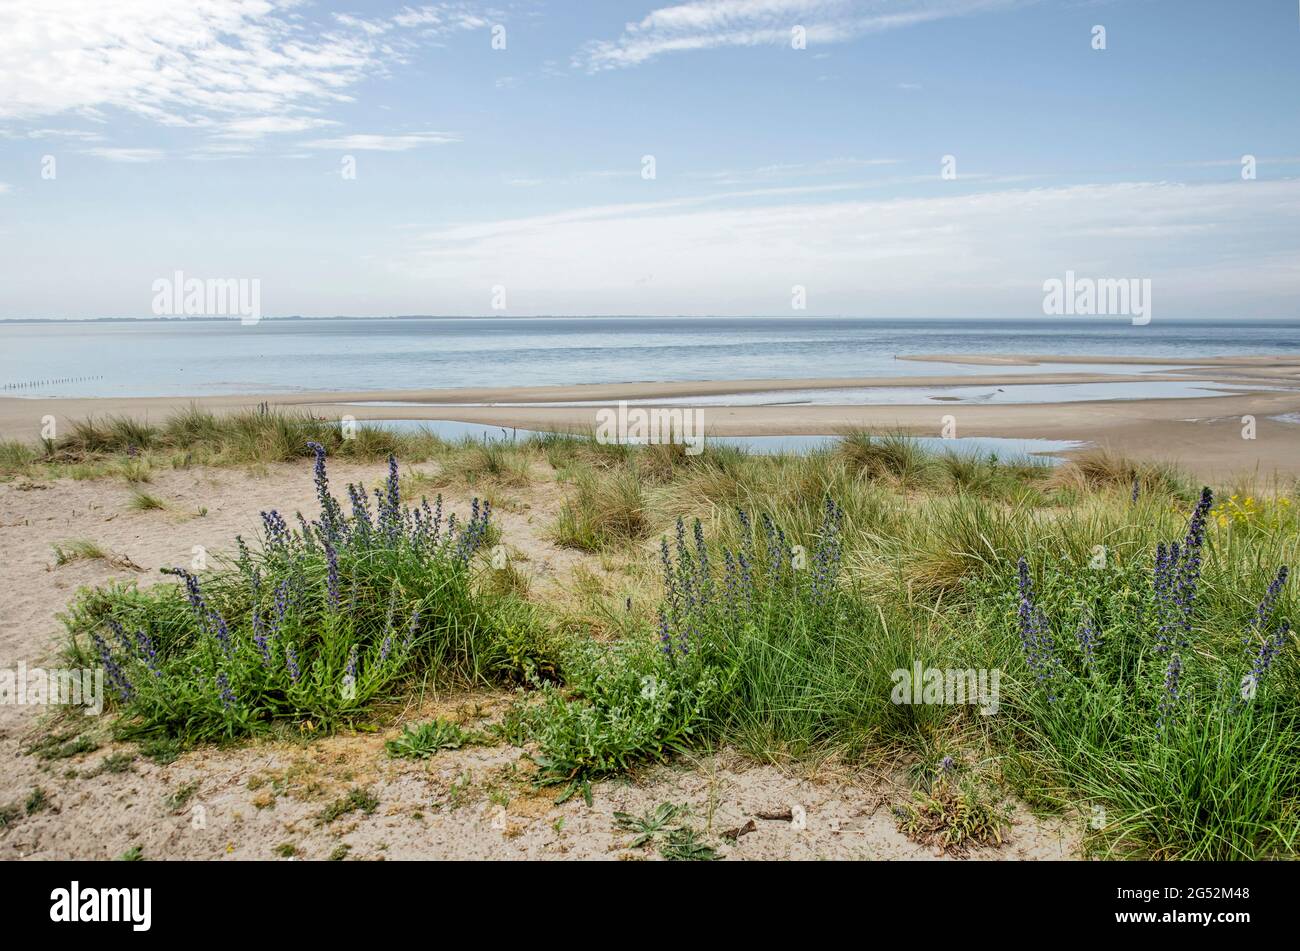 Echium vulgare and marram grass growing on a tall dune at Maasvlakte industrial area in Rotterdam, The Netherlands Stock Photo